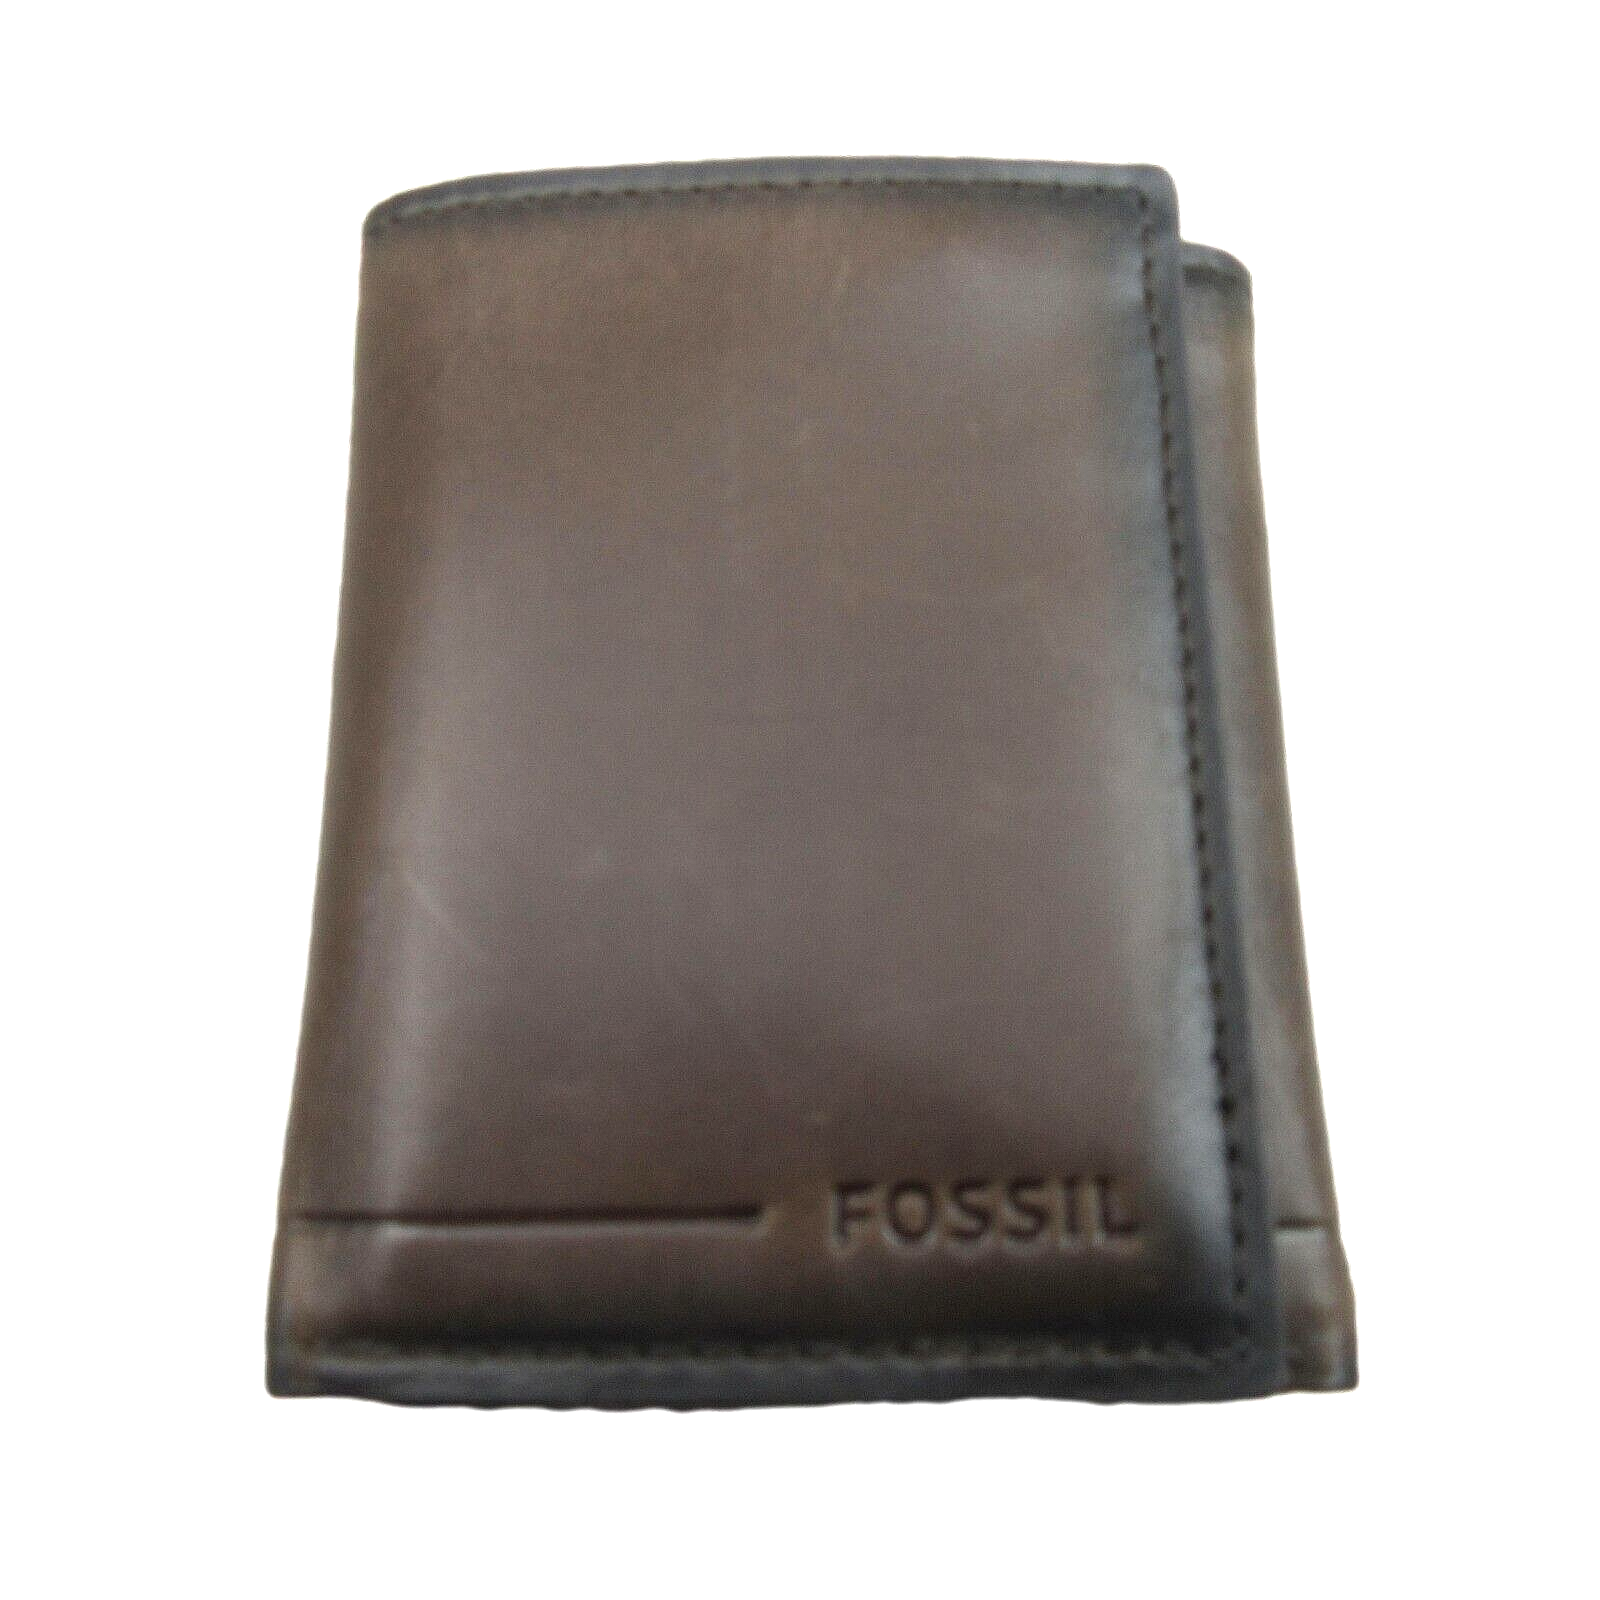 Primary image for Fossil Allen RFID Trifold Dark Brown Leather Mens Wallet NEW SML1550201